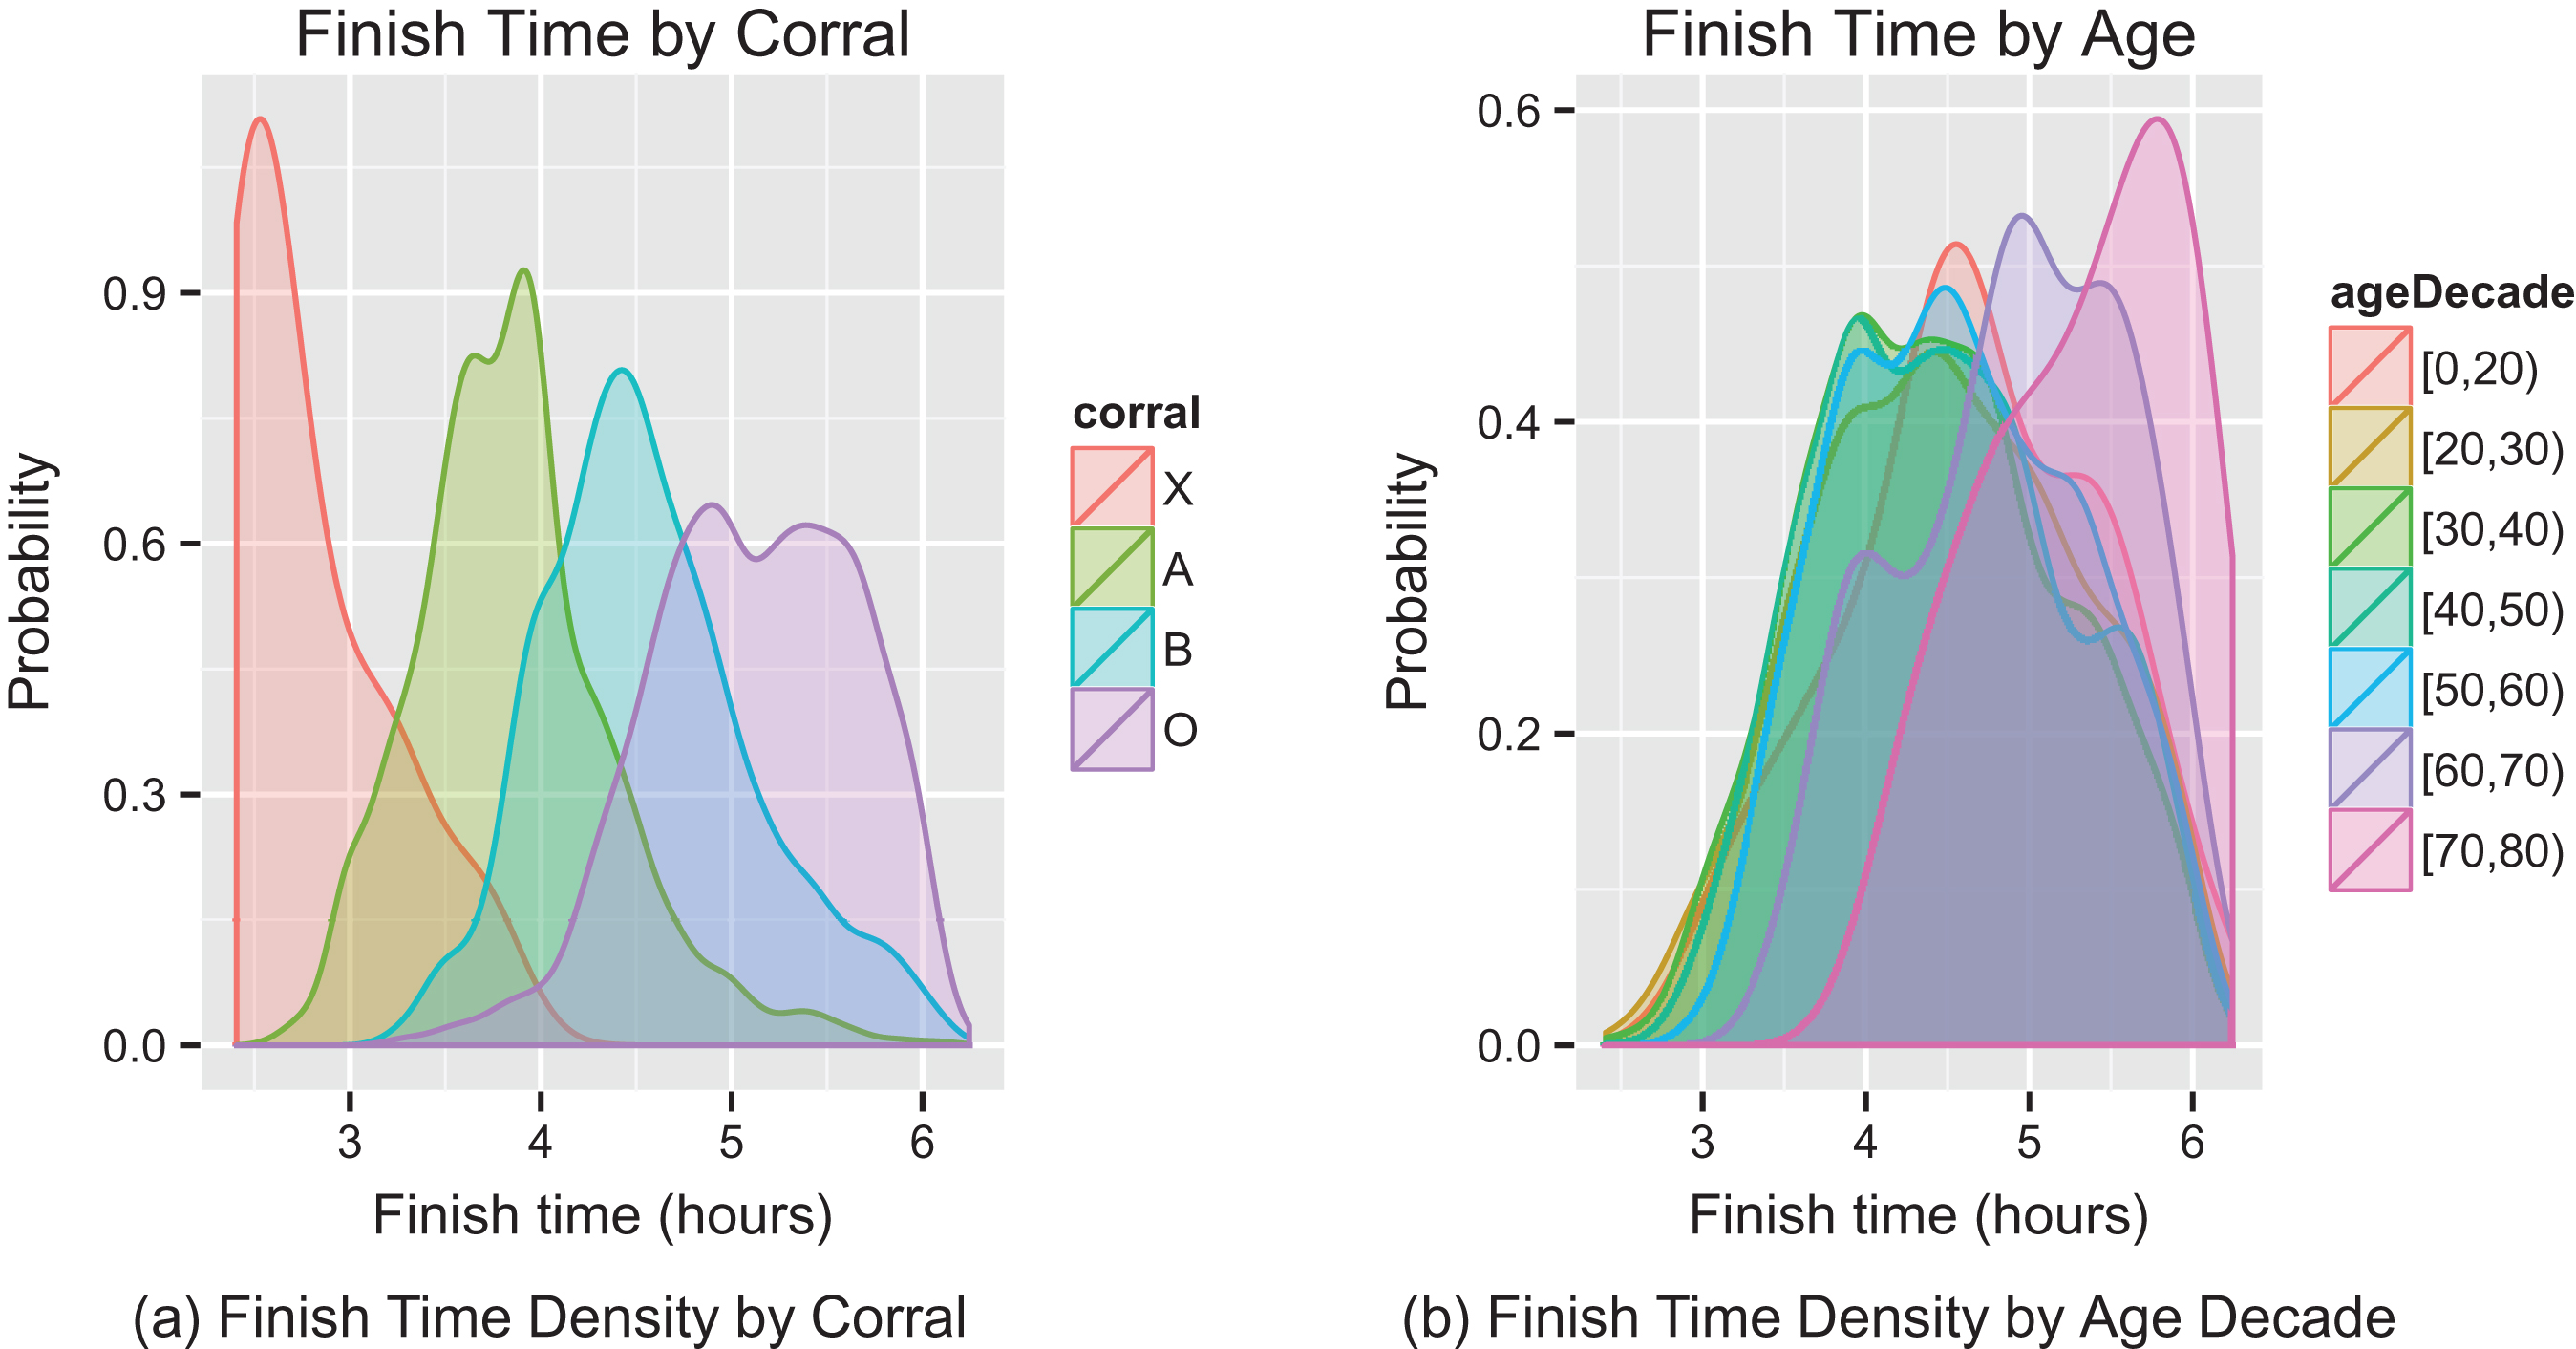 Density plot of finish times by corral and age.